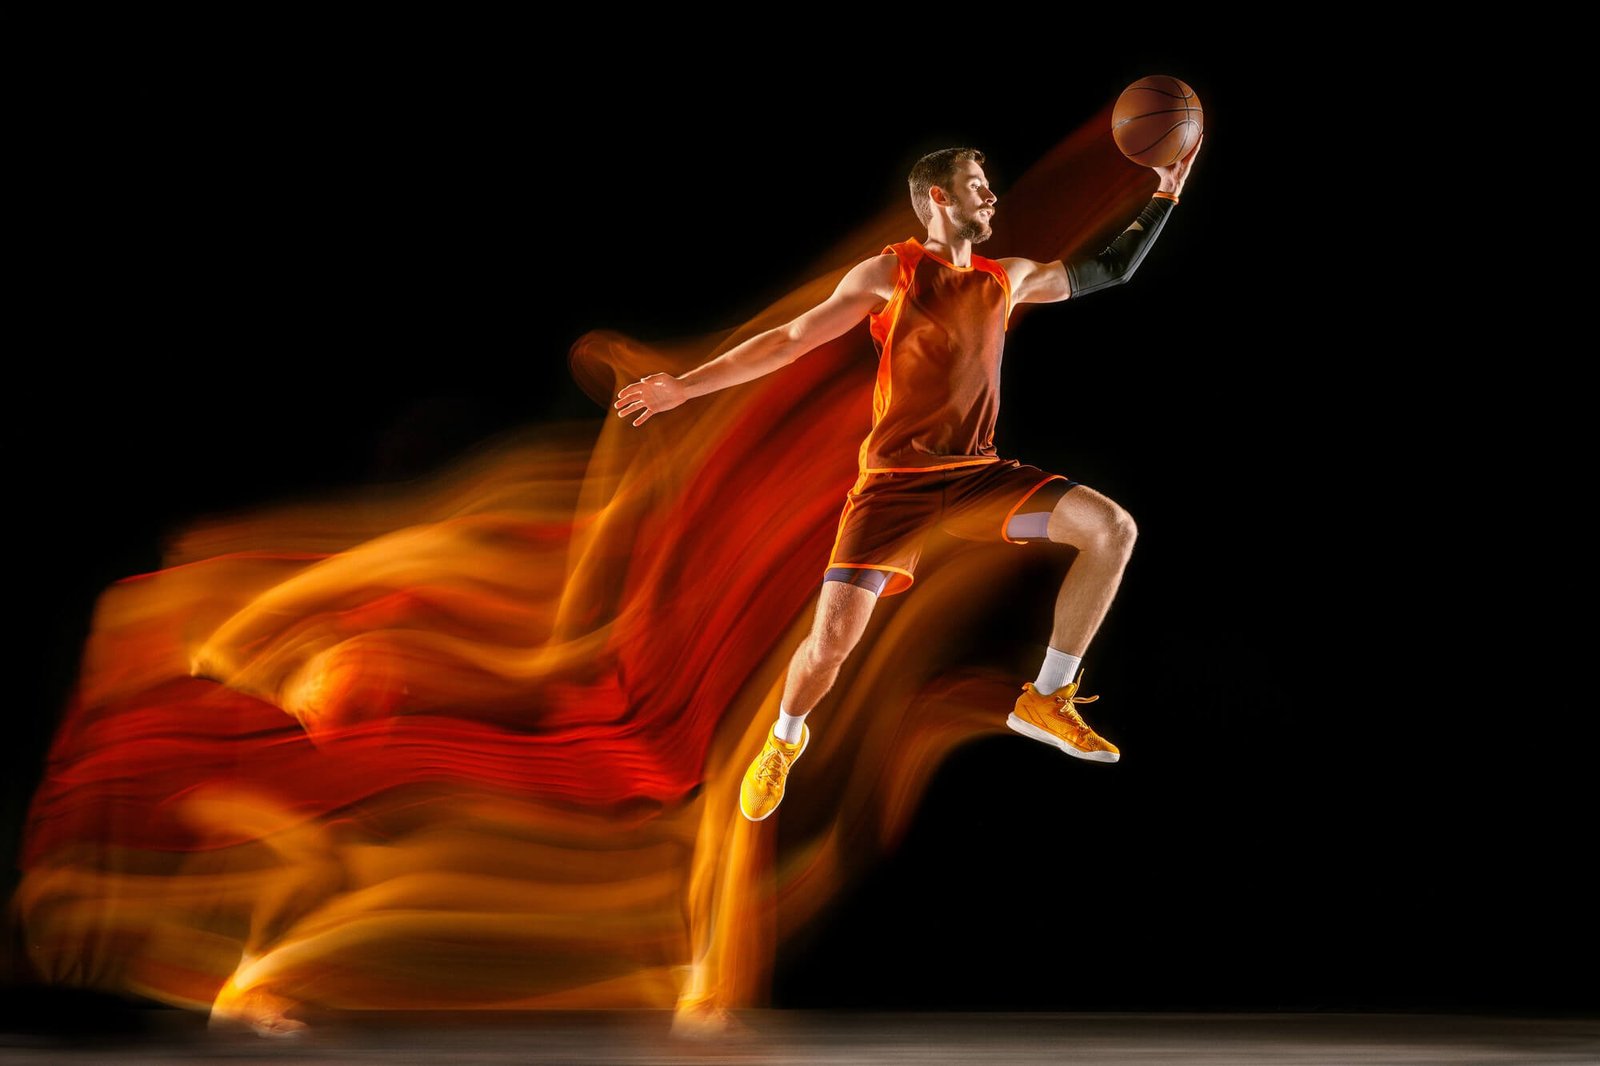 fire-tracks-young-caucasian-basketball-player-red-team-action